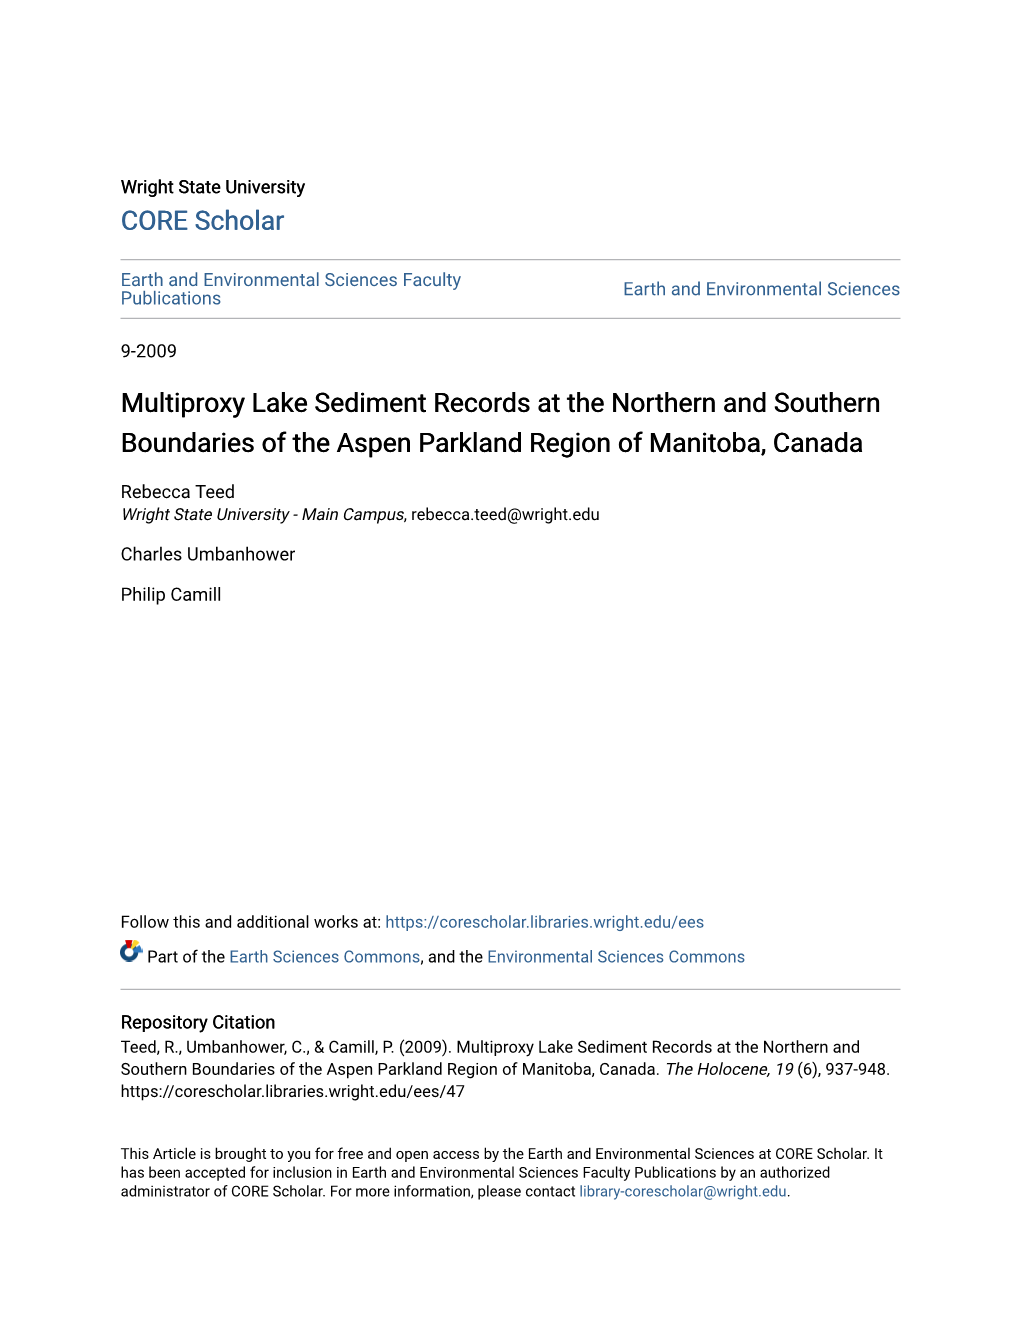 Multiproxy Lake Sediment Records at the Northern and Southern Boundaries of the Aspen Parkland Region of Manitoba, Canada